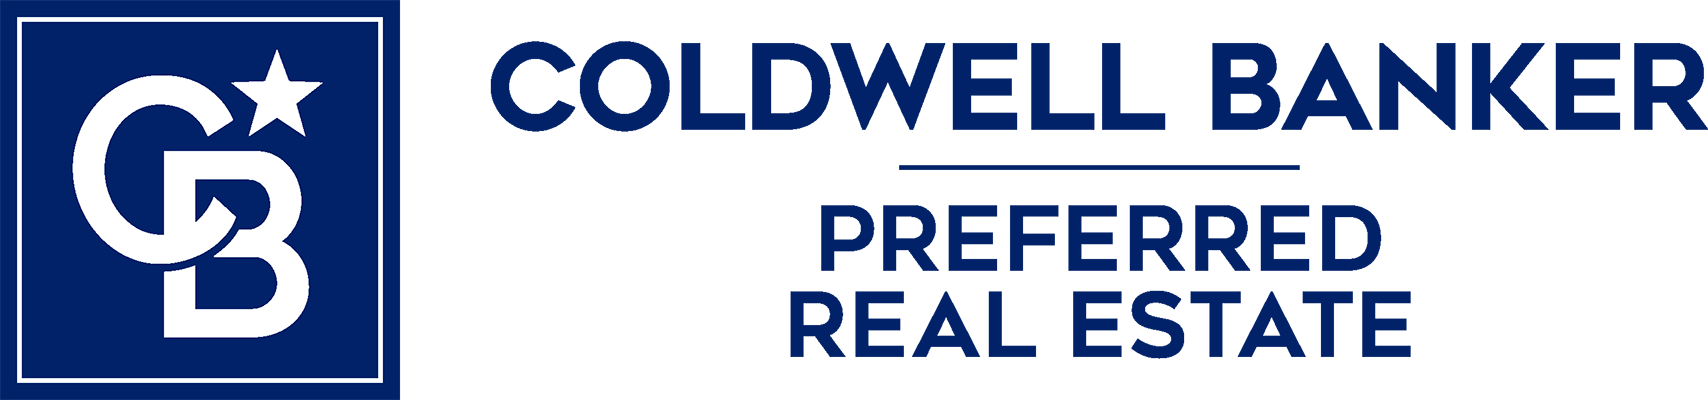 Coldwell Banker Preferred Real Estate stacked logo in blue